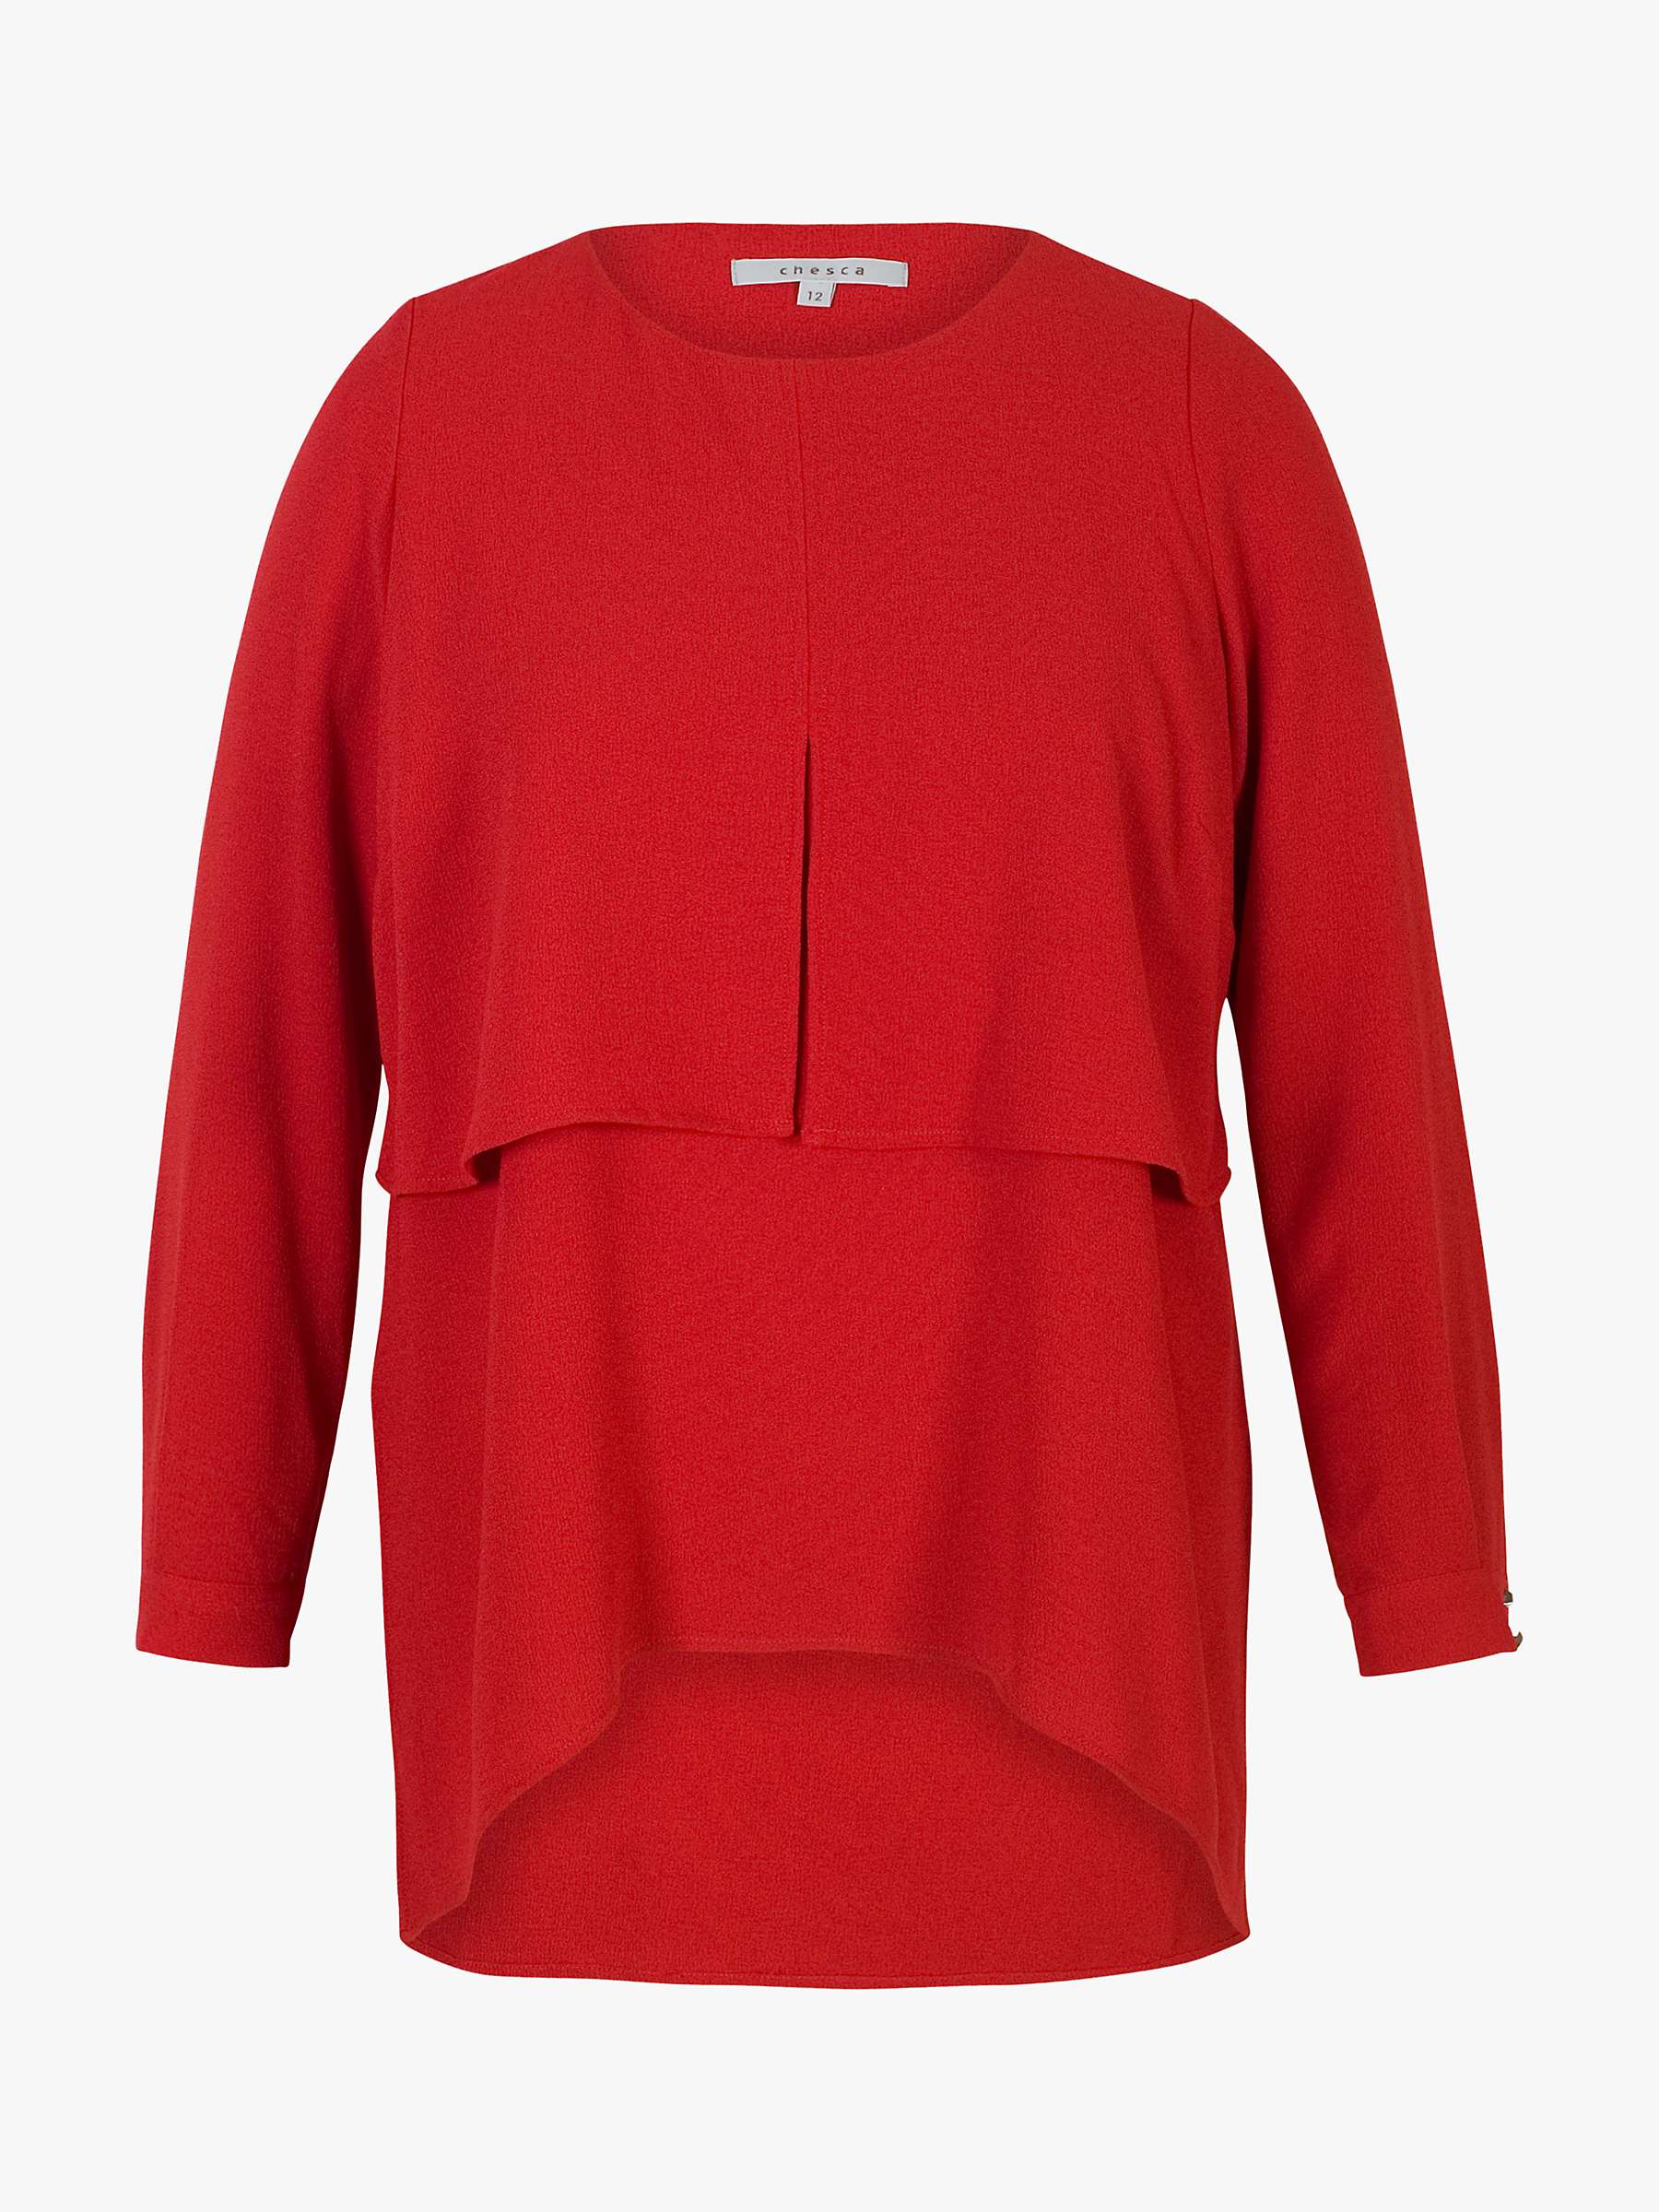 Buy Chesca Double Layer Top Online at johnlewis.com